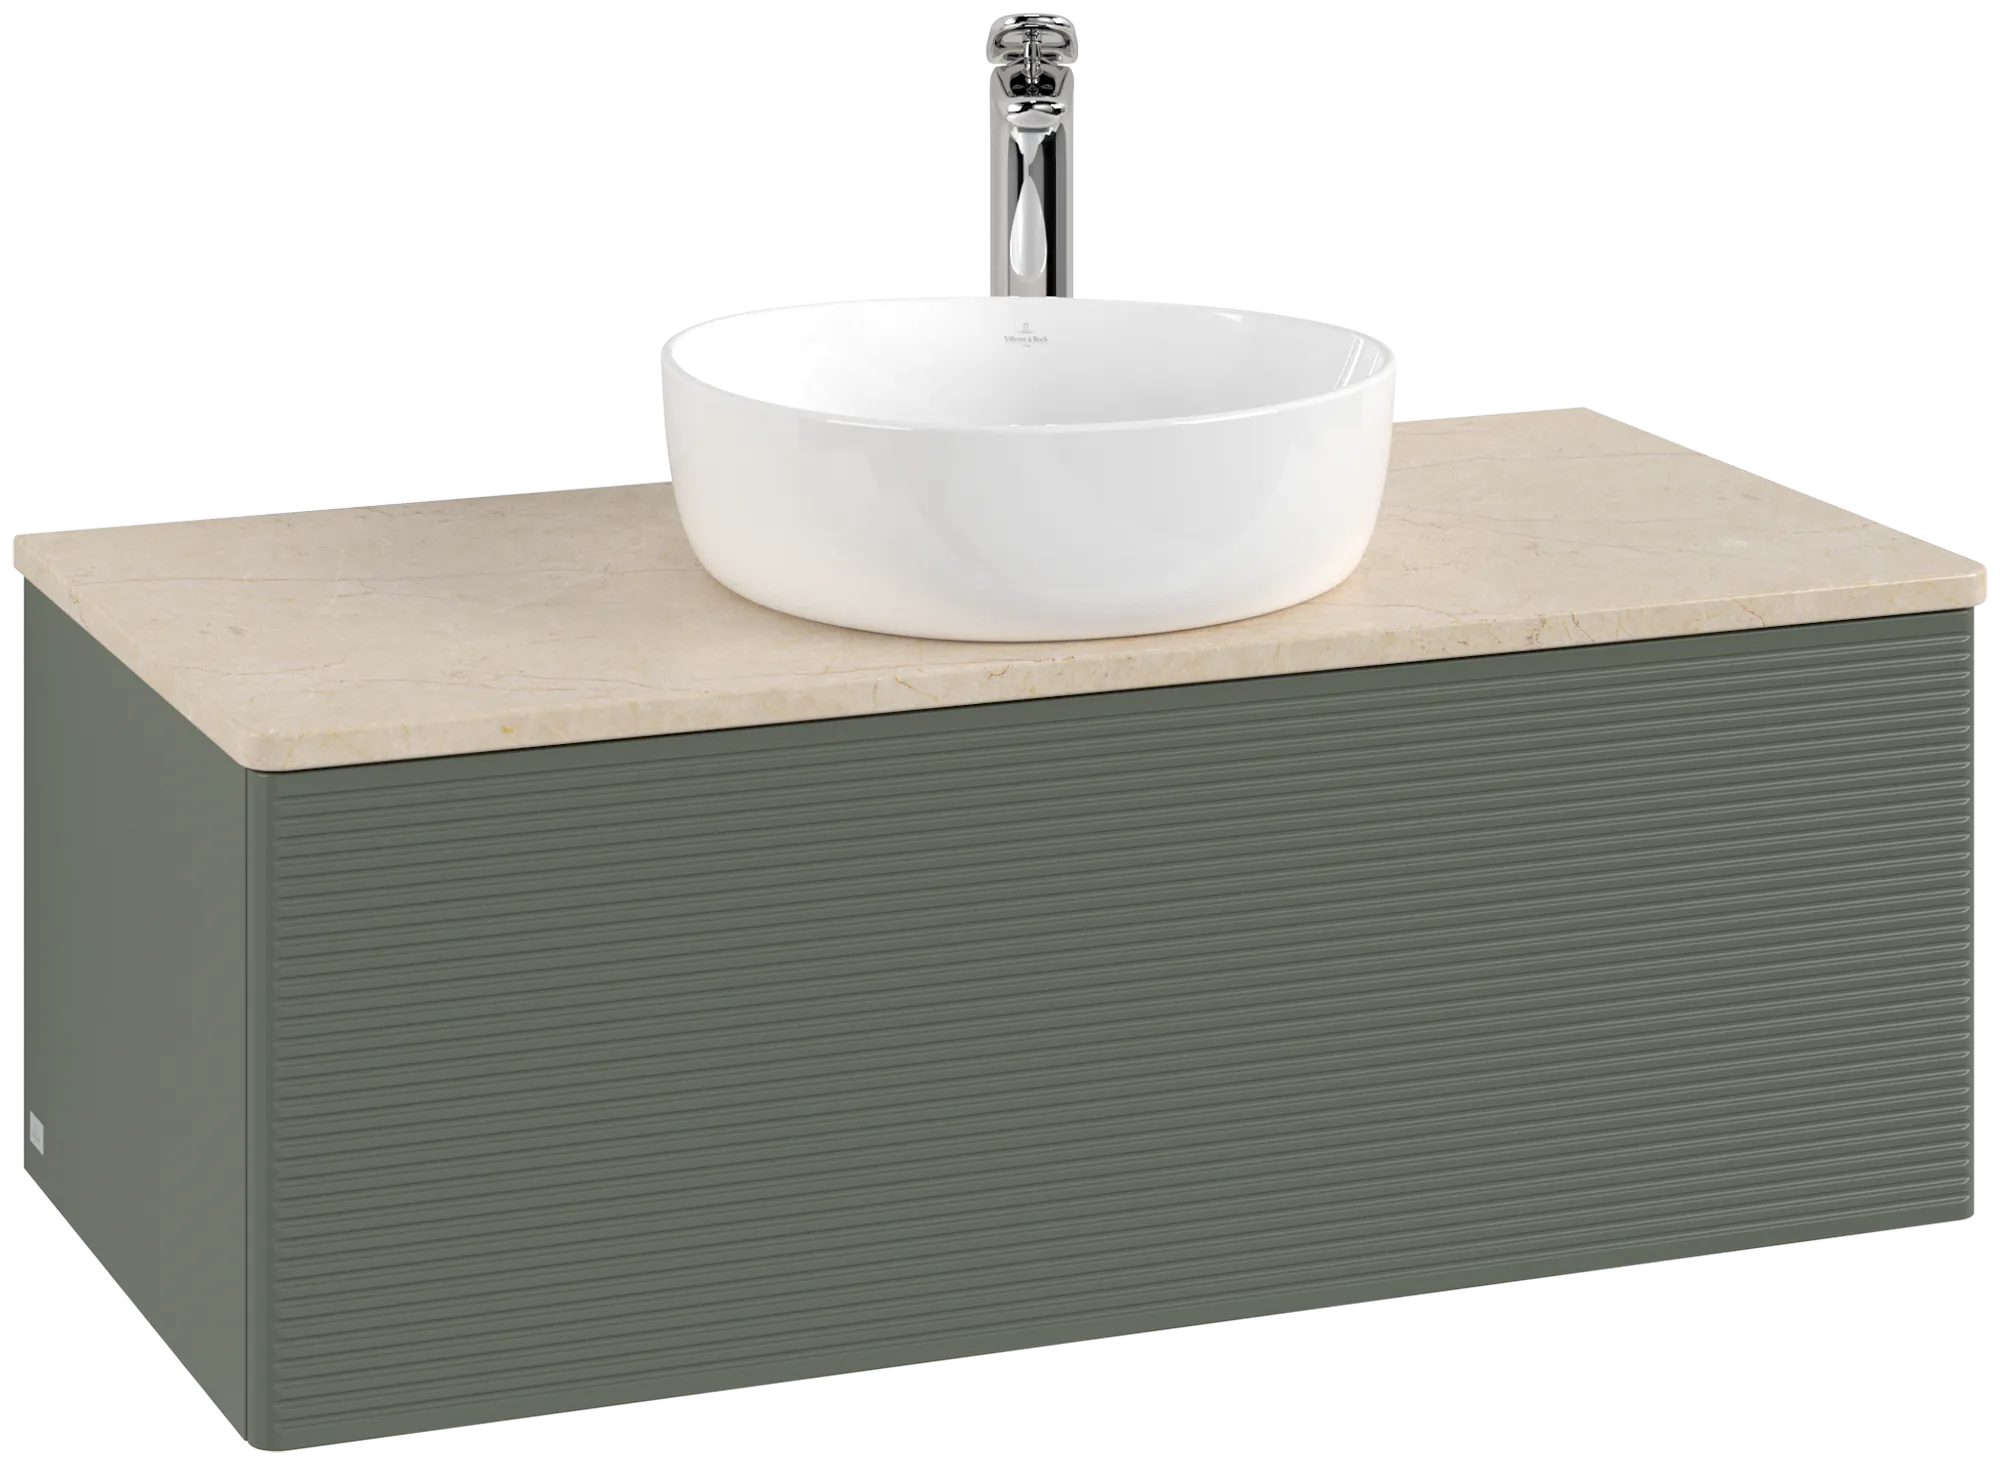 Picture of VILLEROY BOCH Antao Vanity unit, with lighting, 1 pull-out compartment, 1000 x 360 x 500 mm, Front with grain texture, Leaf Green Matt Lacquer / Botticino #L31153HL